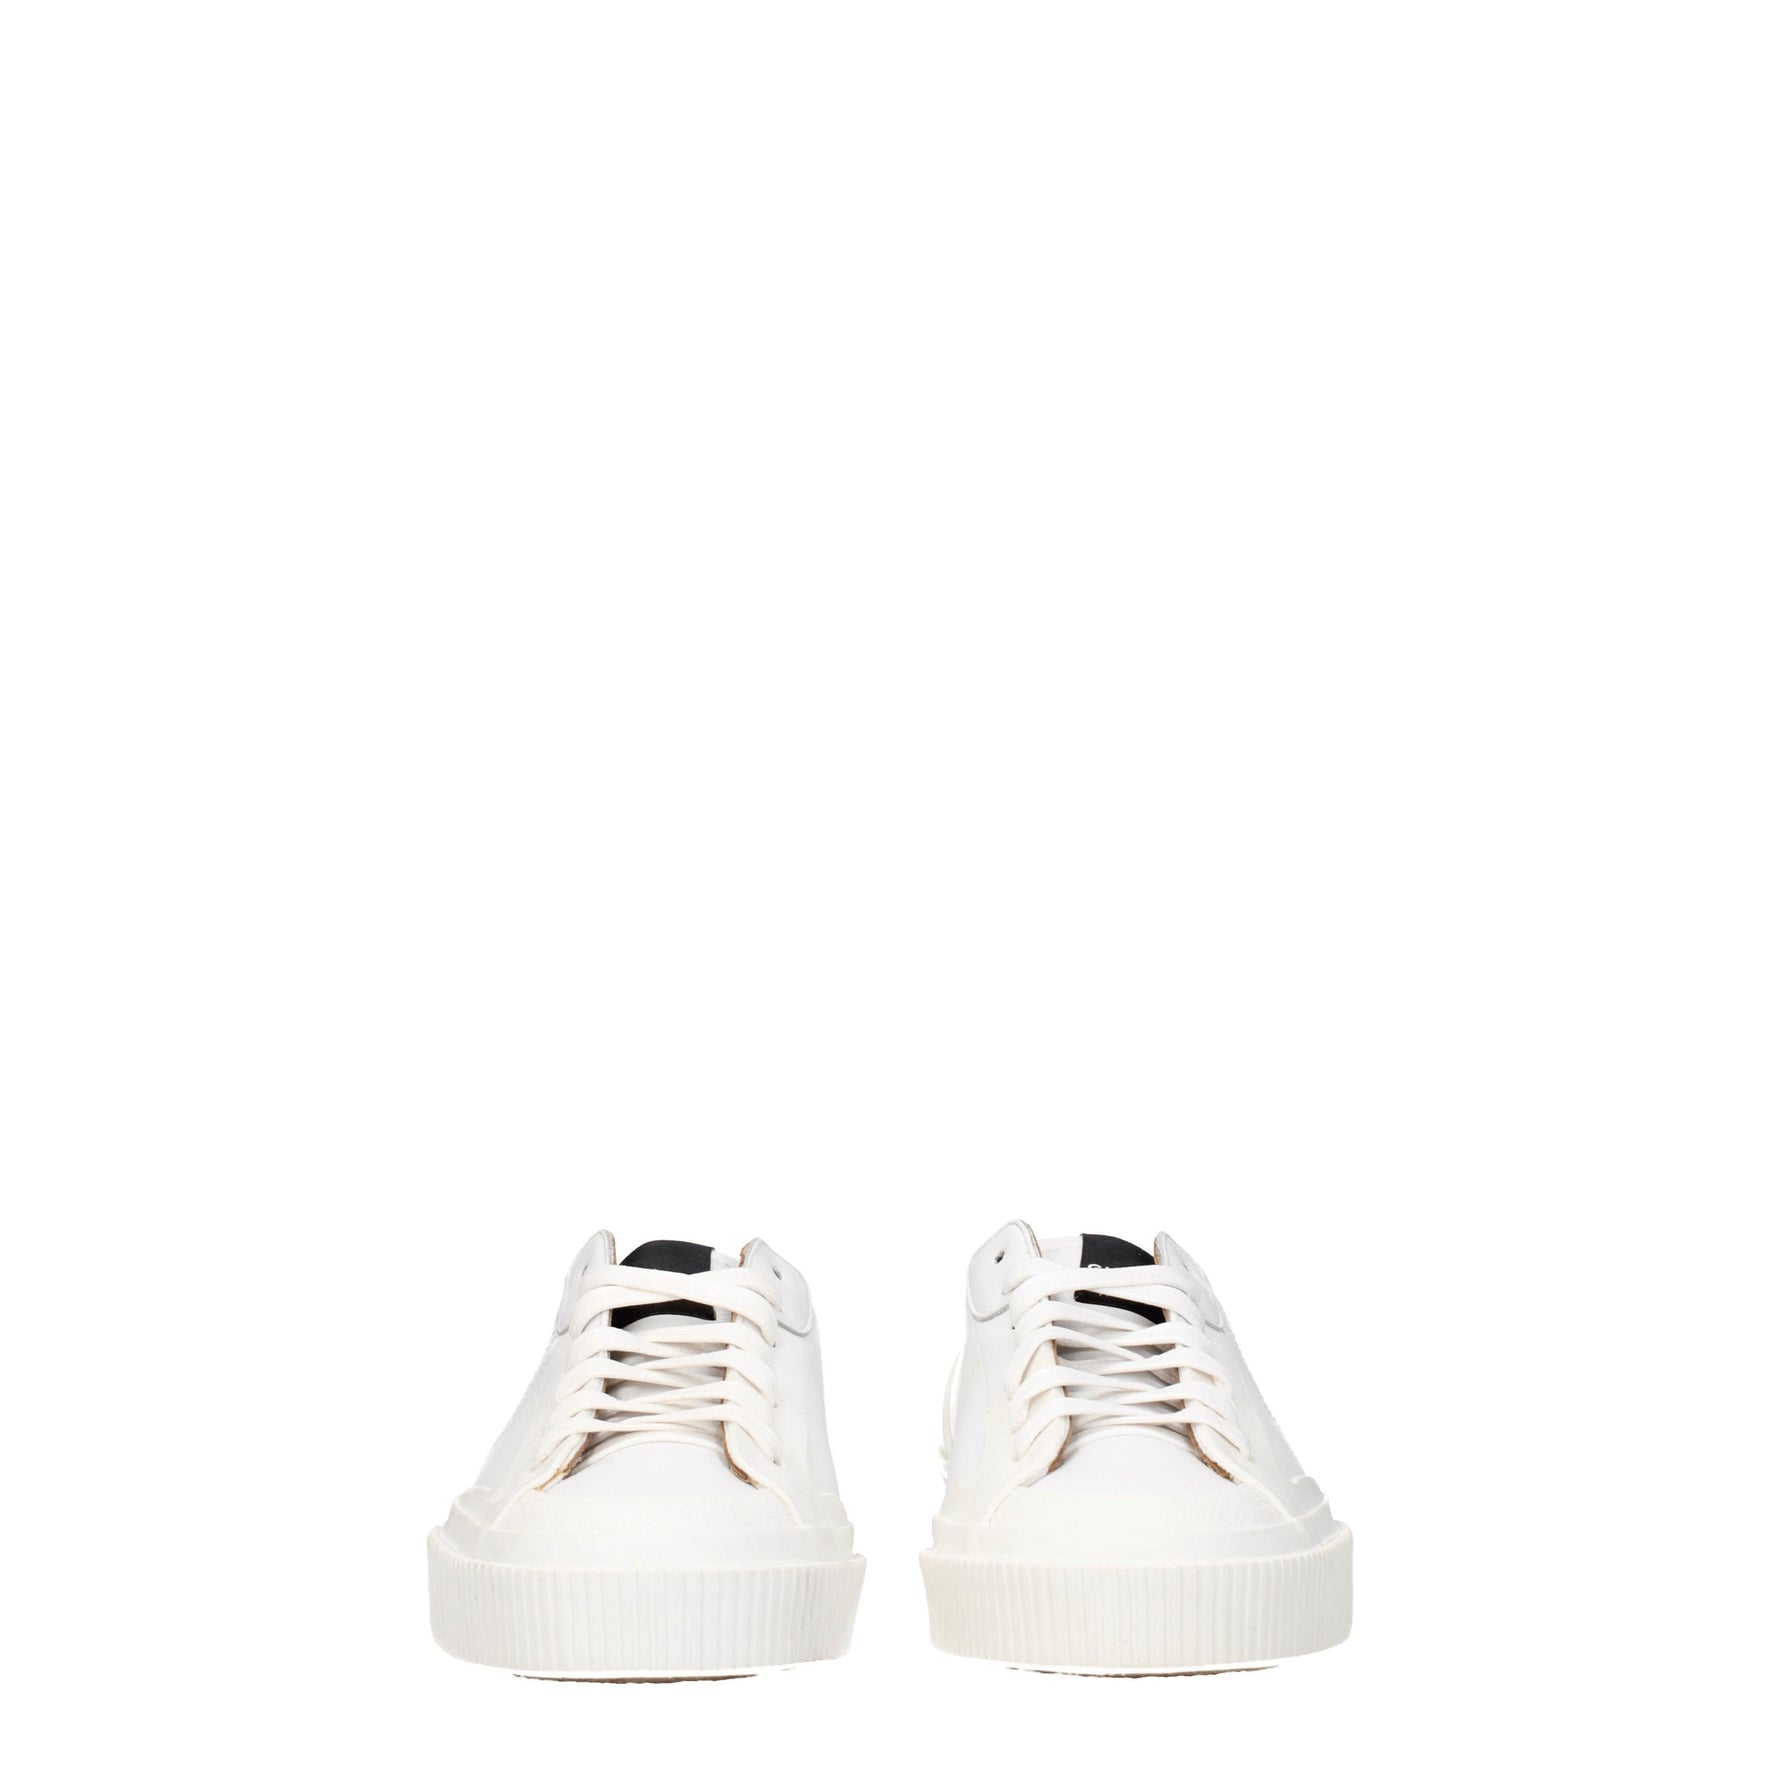 Givenchy Sneakers Donna Pelle Bianco Bianco Ottico